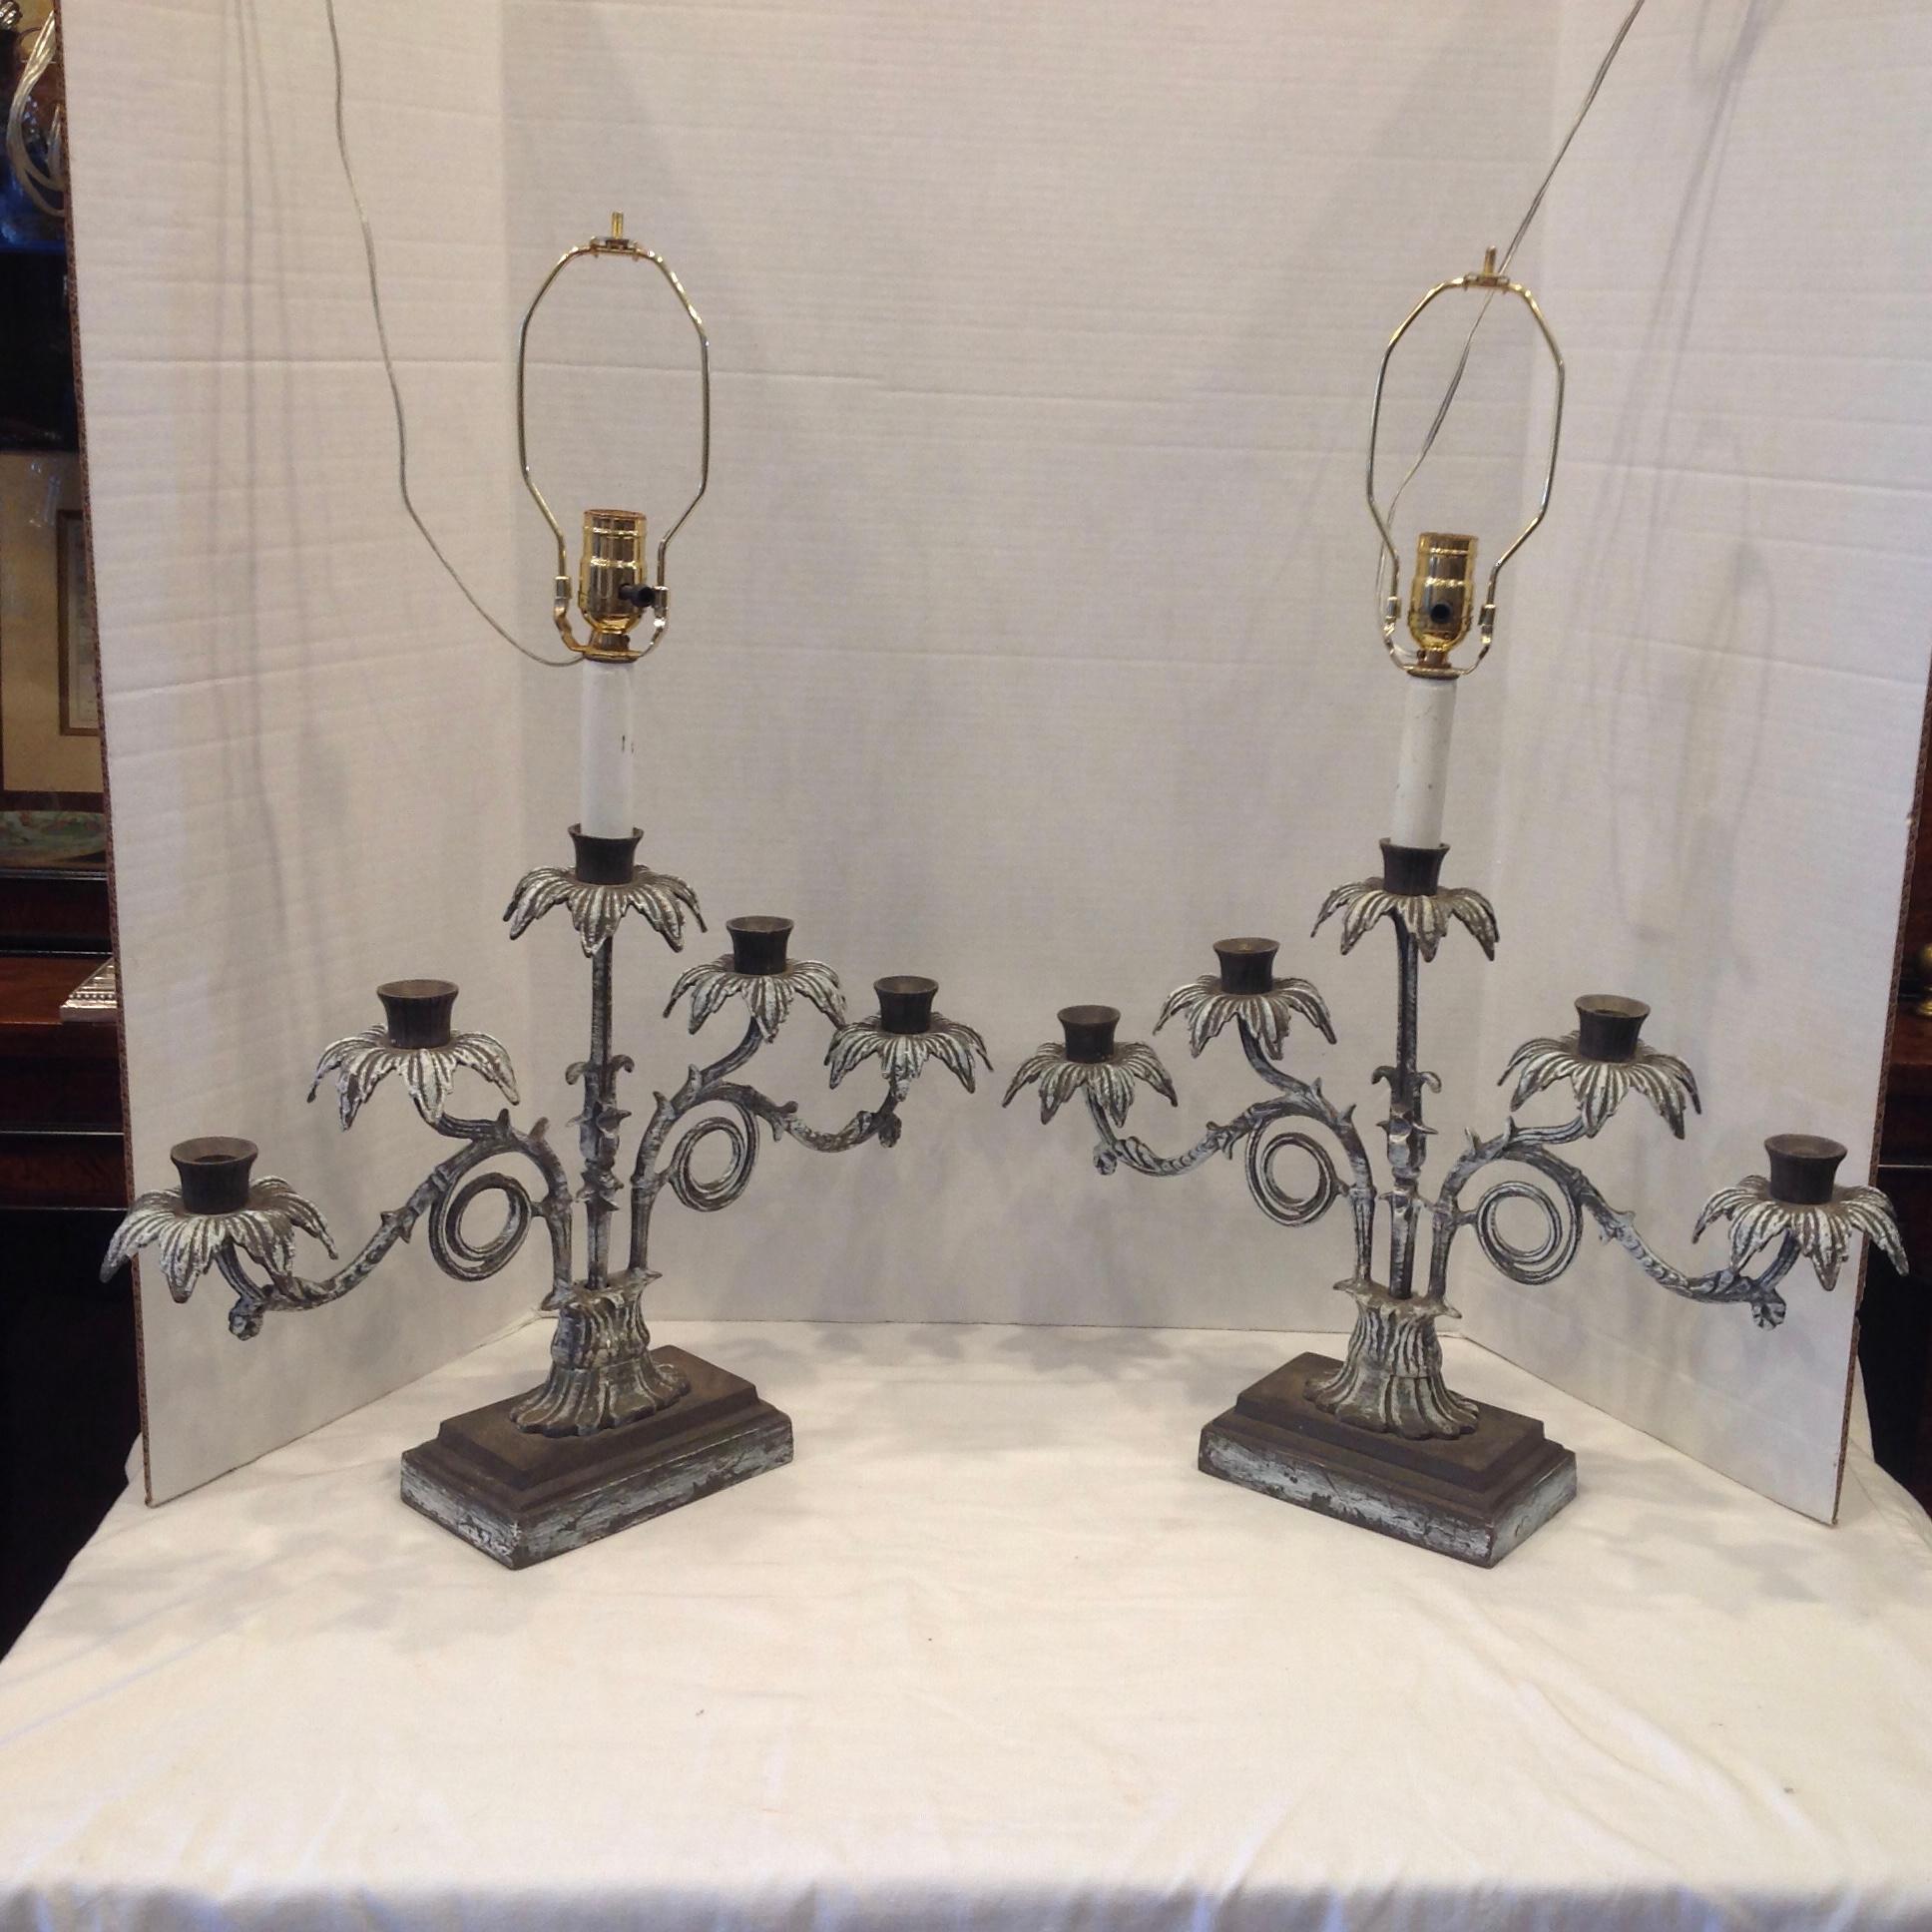 Cast fro iron with five branch like arms. Formerly candelabra - now electrified.
Dramatic style. Lamps are measured to top of socket.